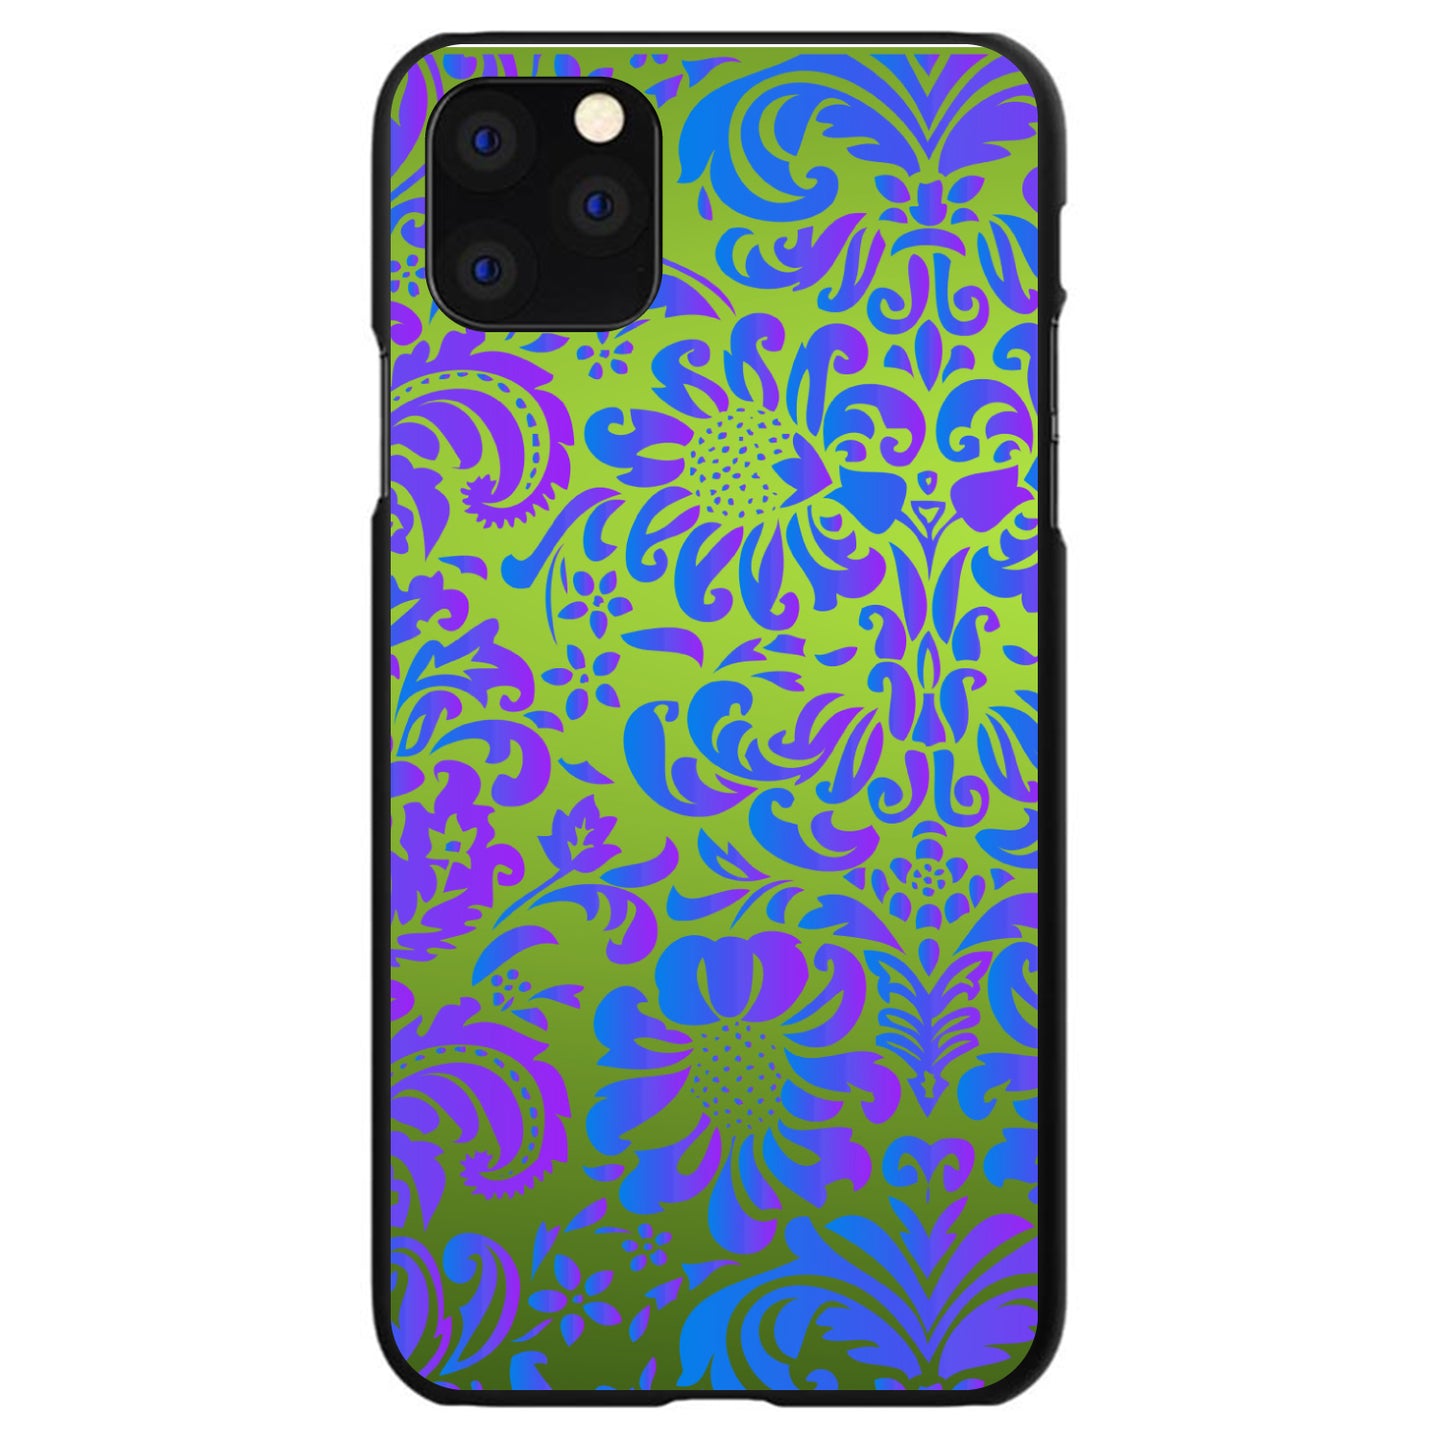 DistinctInk® Hard Plastic Snap-On Case for Apple iPhone or Samsung Galaxy - Green Purple Blue Floral Pattern